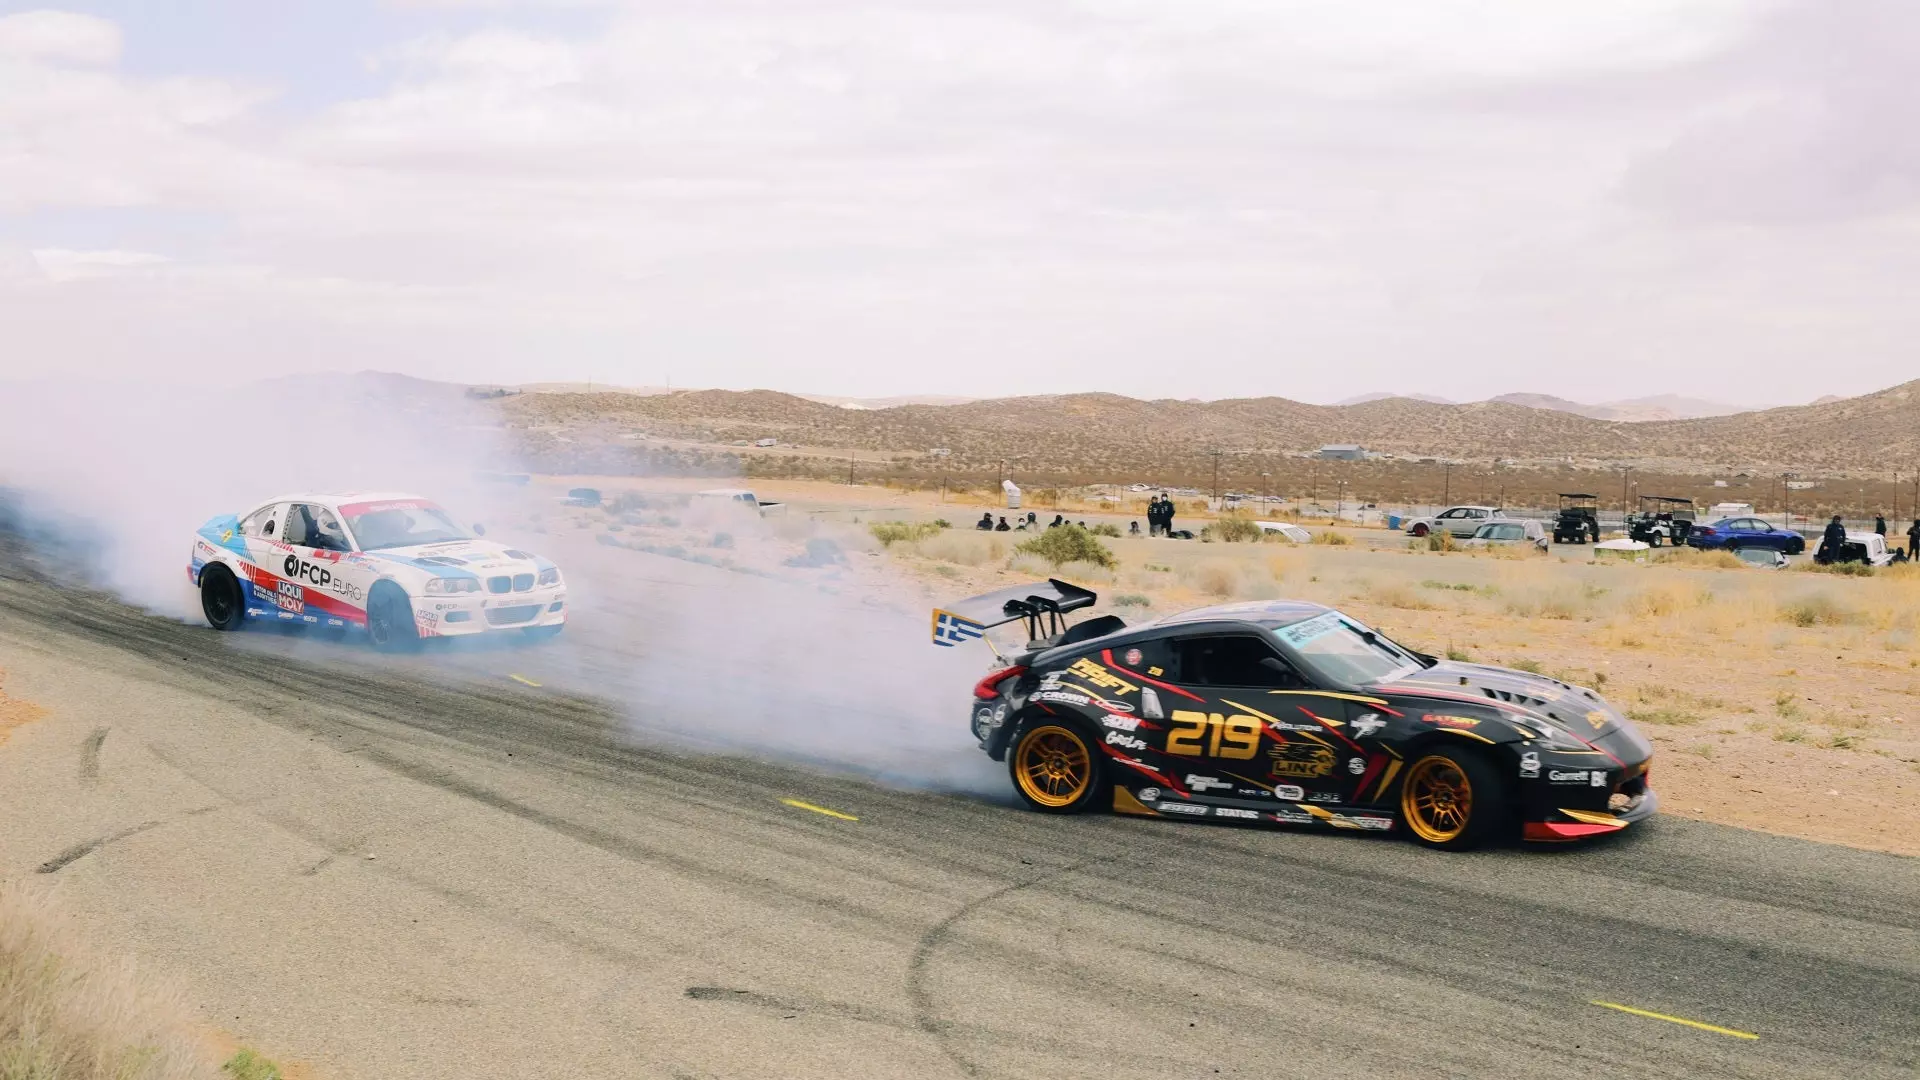 The Most Extreme Drift Cars Keep Roasting Their Tires When They Go Straight